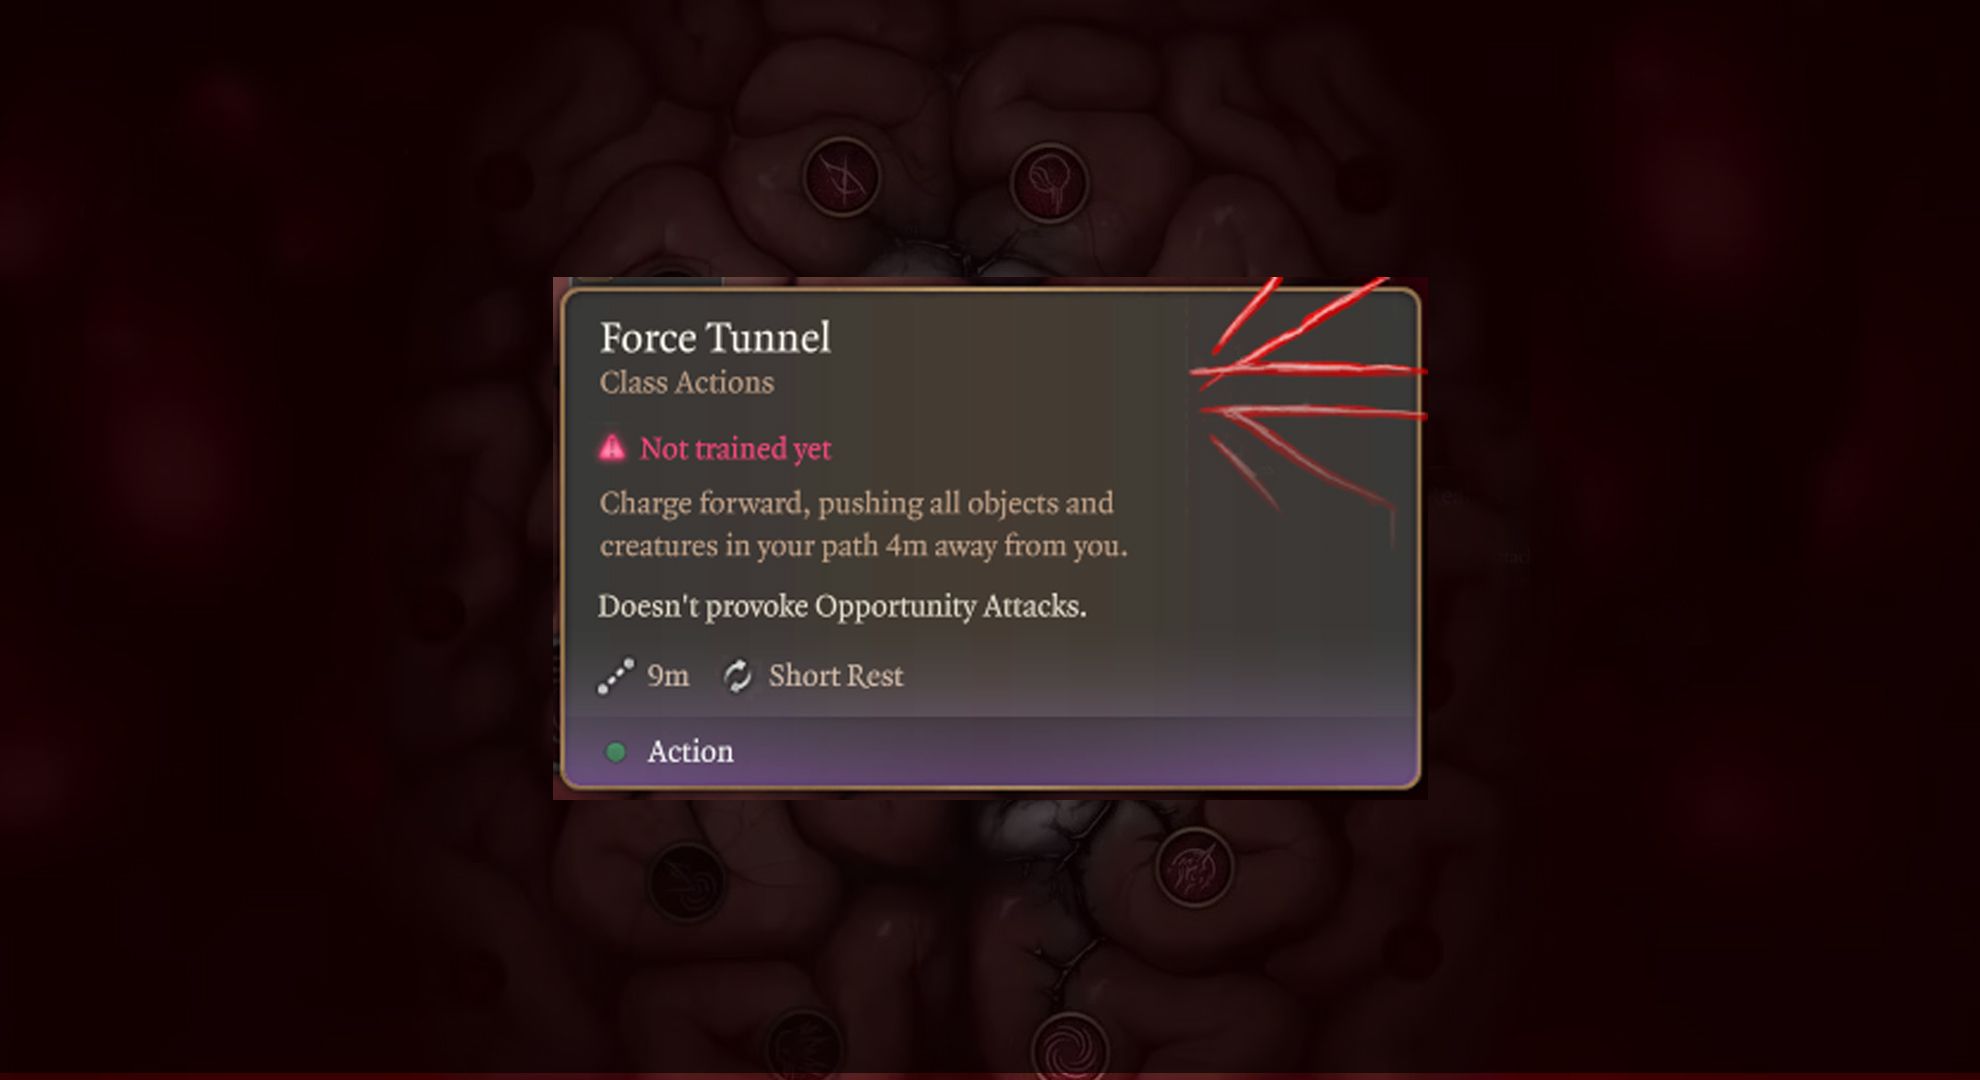 Force Tunnel